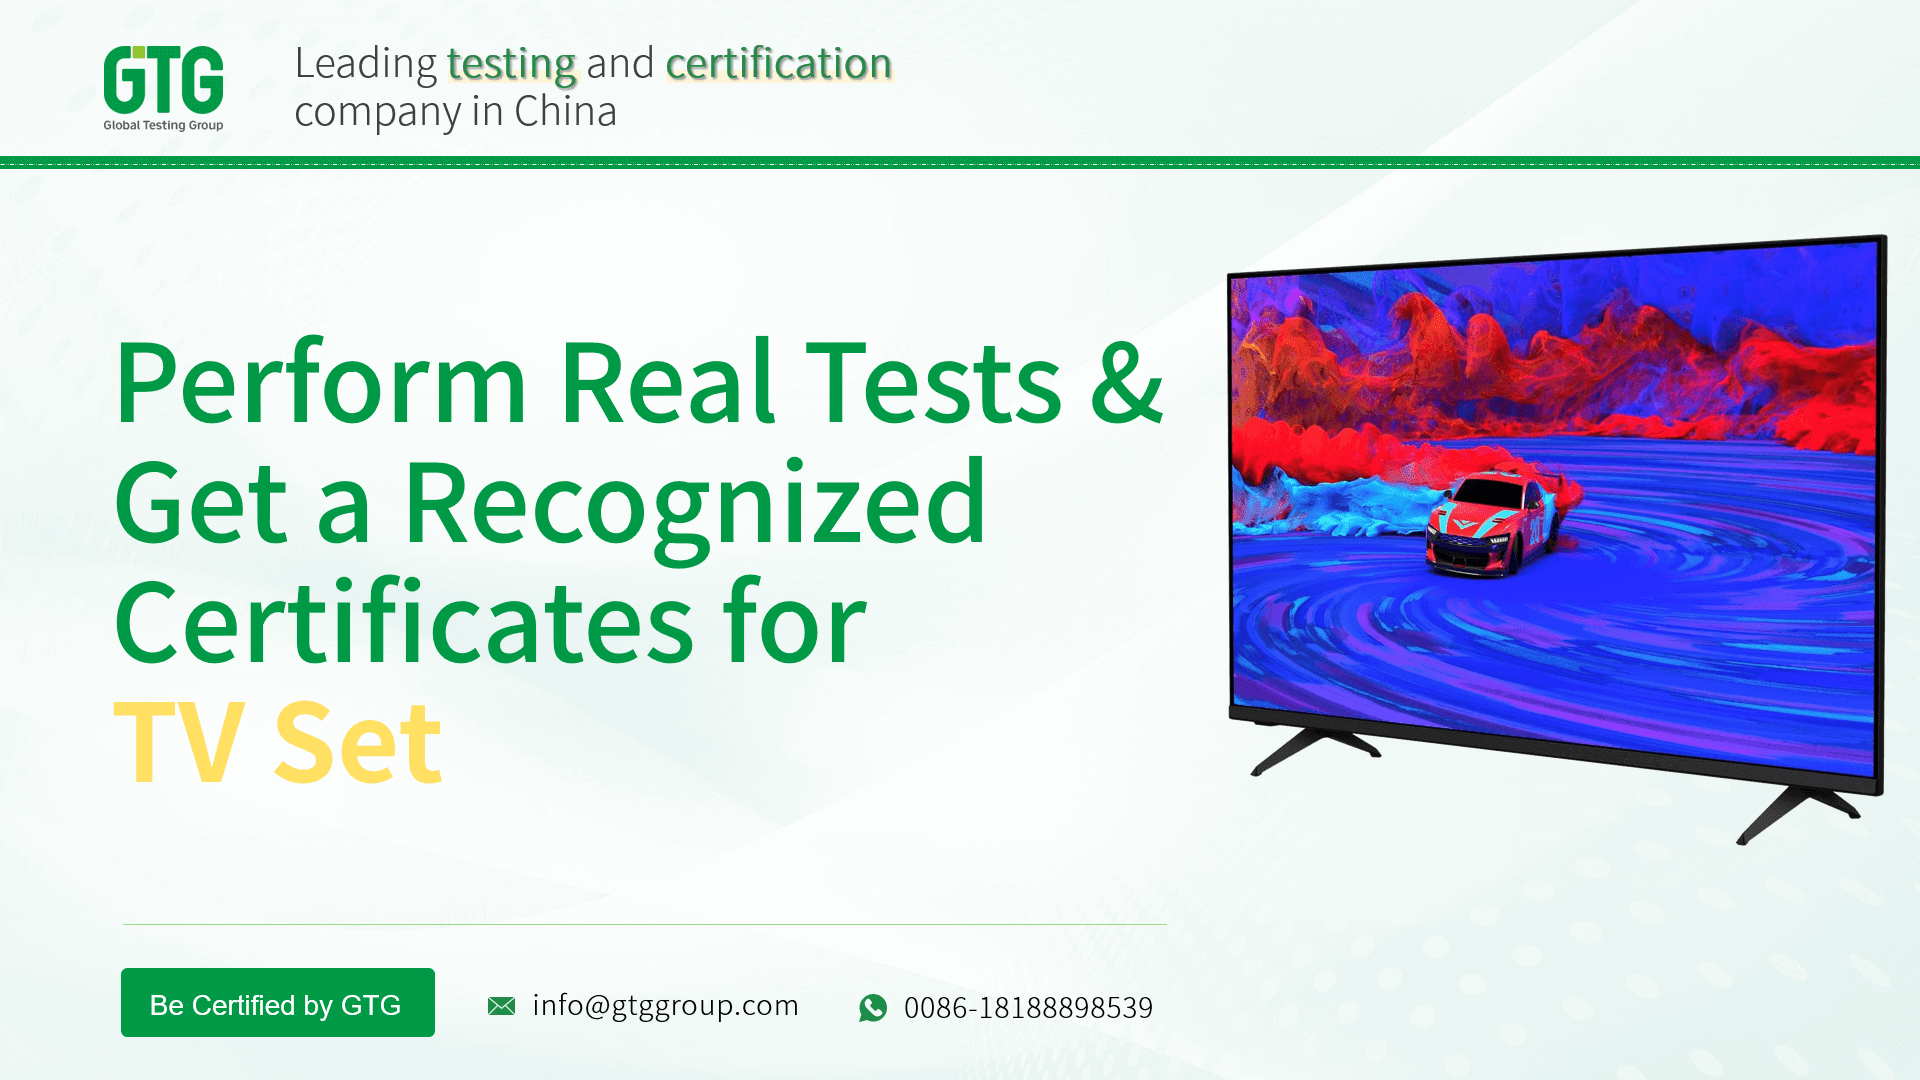 Get Test Report and Certifications for TV Set from GTG Group